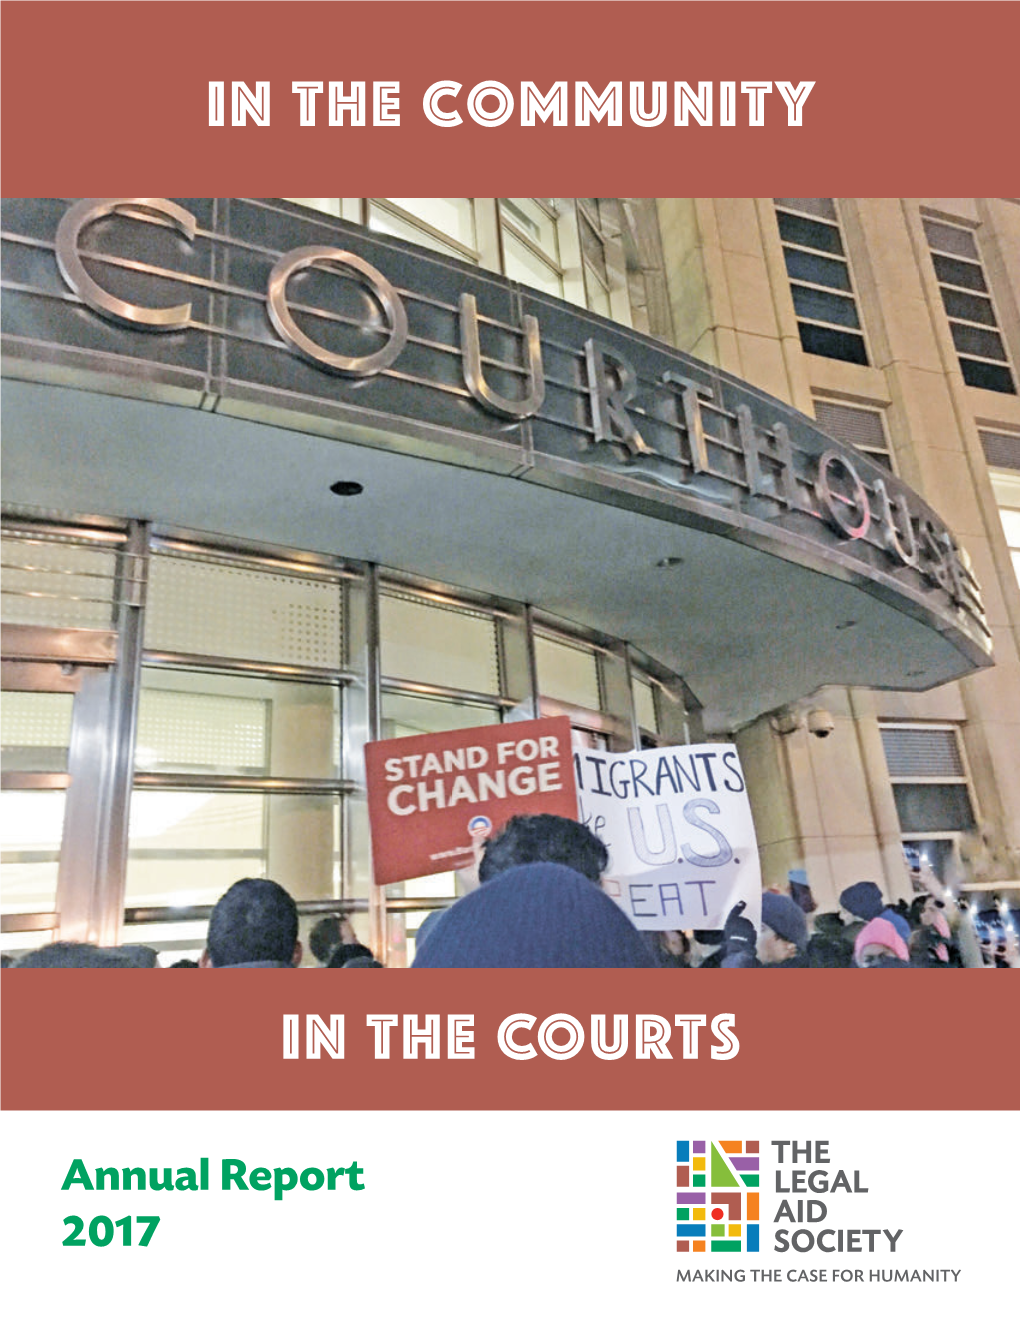 In the Community in the COURTS